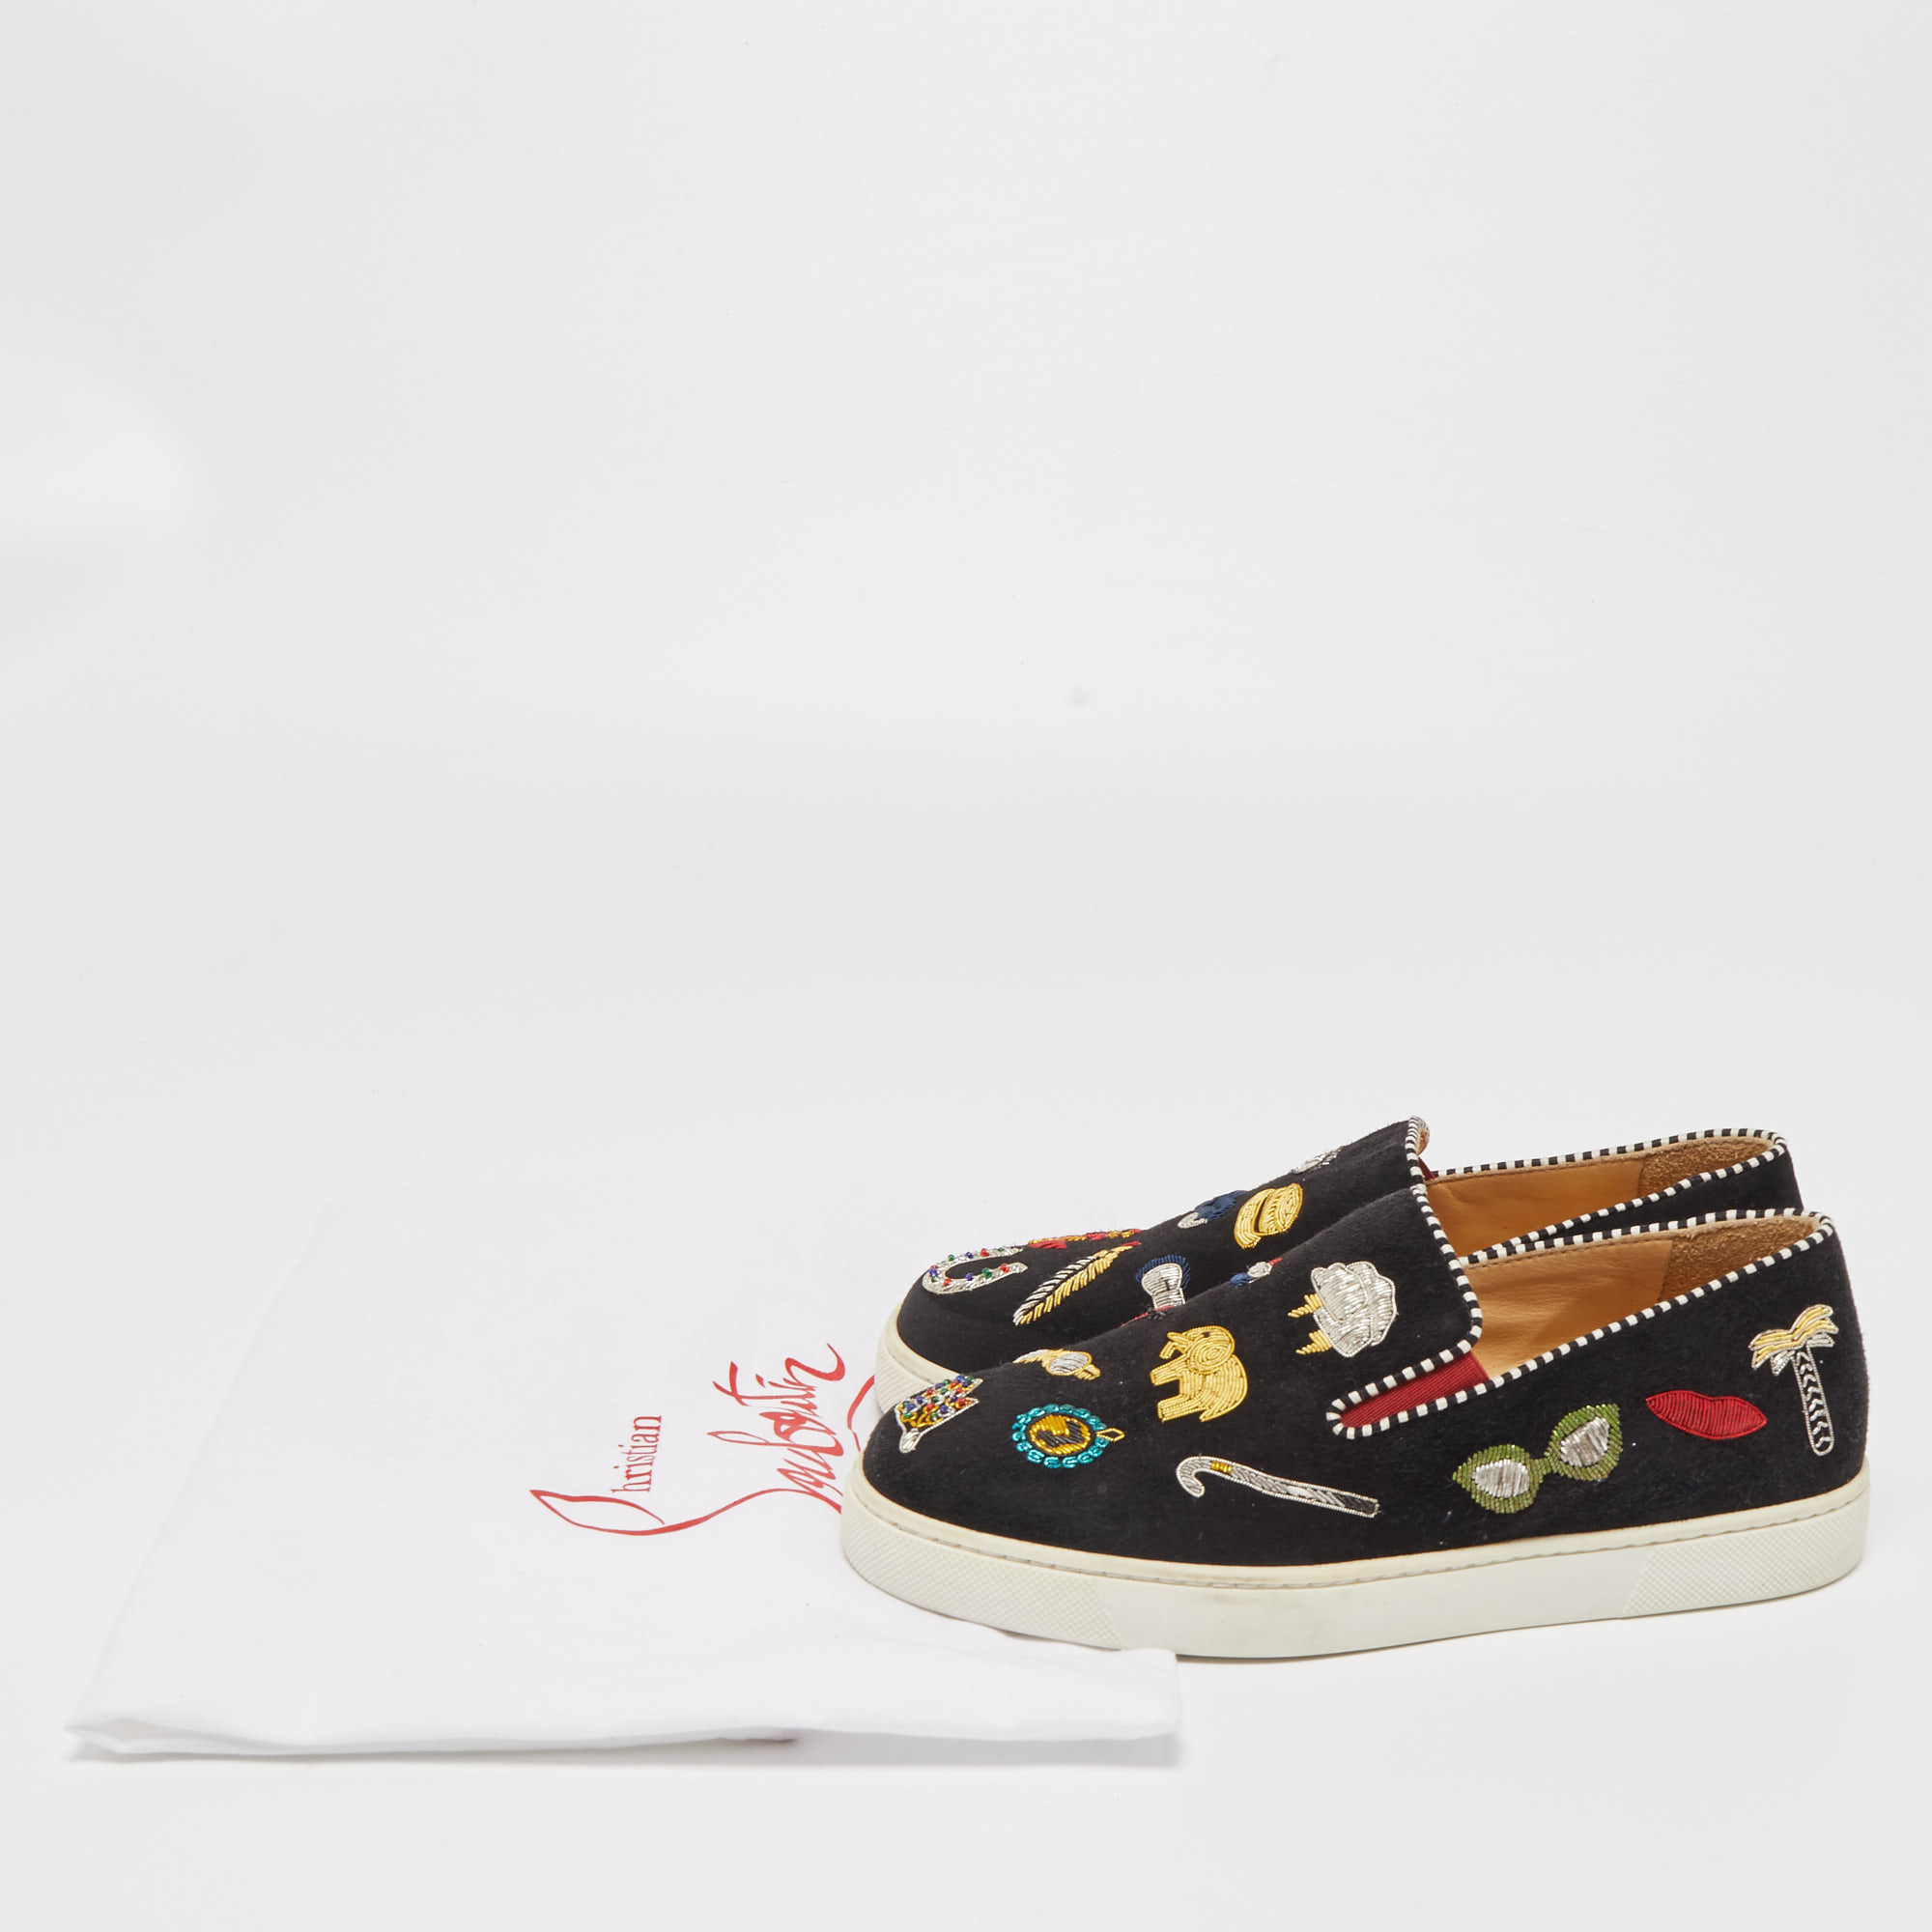 Christian Louboutin Black Suede Pik N Luck Sneakers Size 35